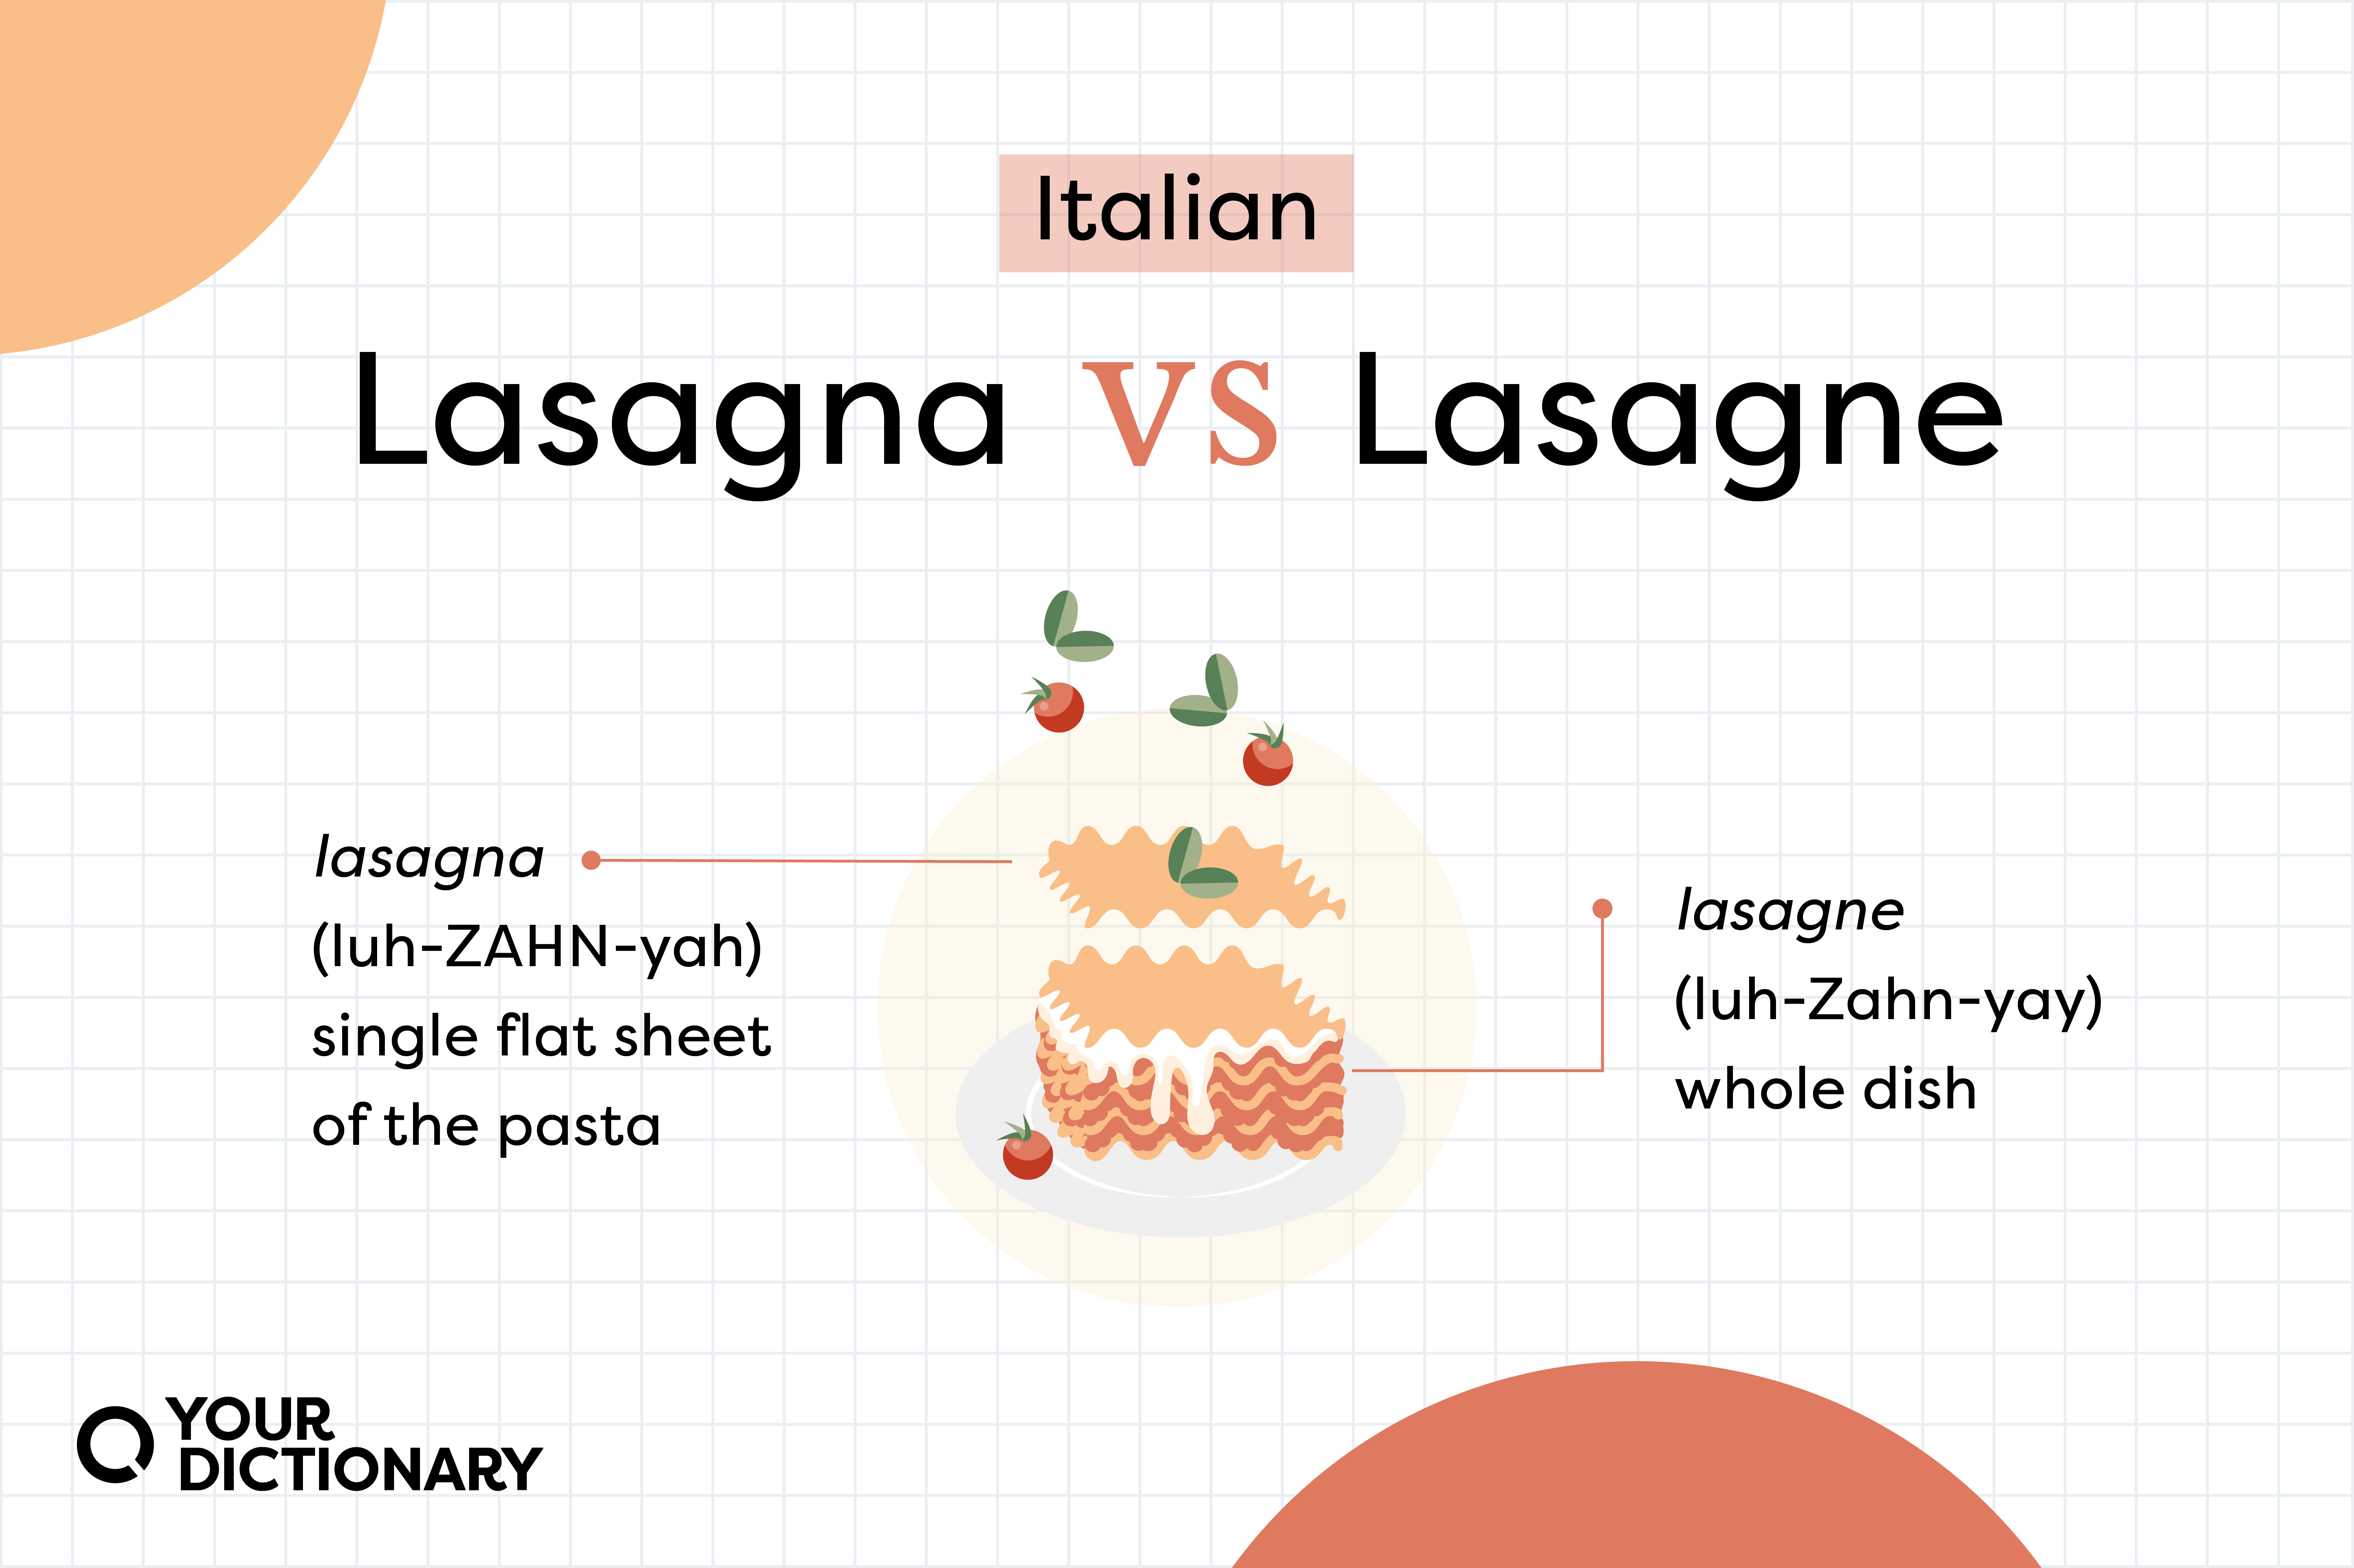 Diagram of parts of lasagne, including the lasagna which is a single sheet of pasta in Italian.